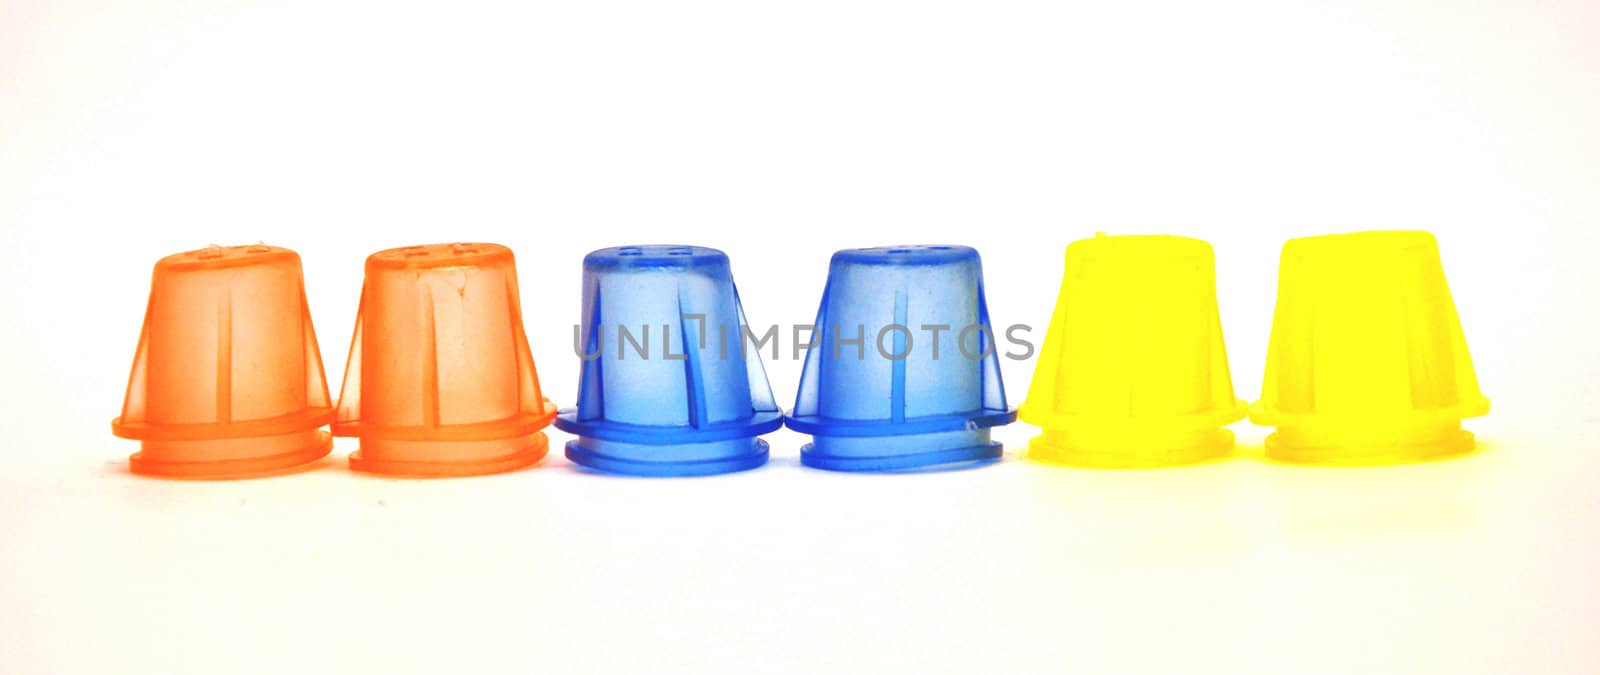 Cone, Three-dimensional Shape, White Background,  Hat, Decoration, Isolated, White, Collection,Yellow, color cone ...more